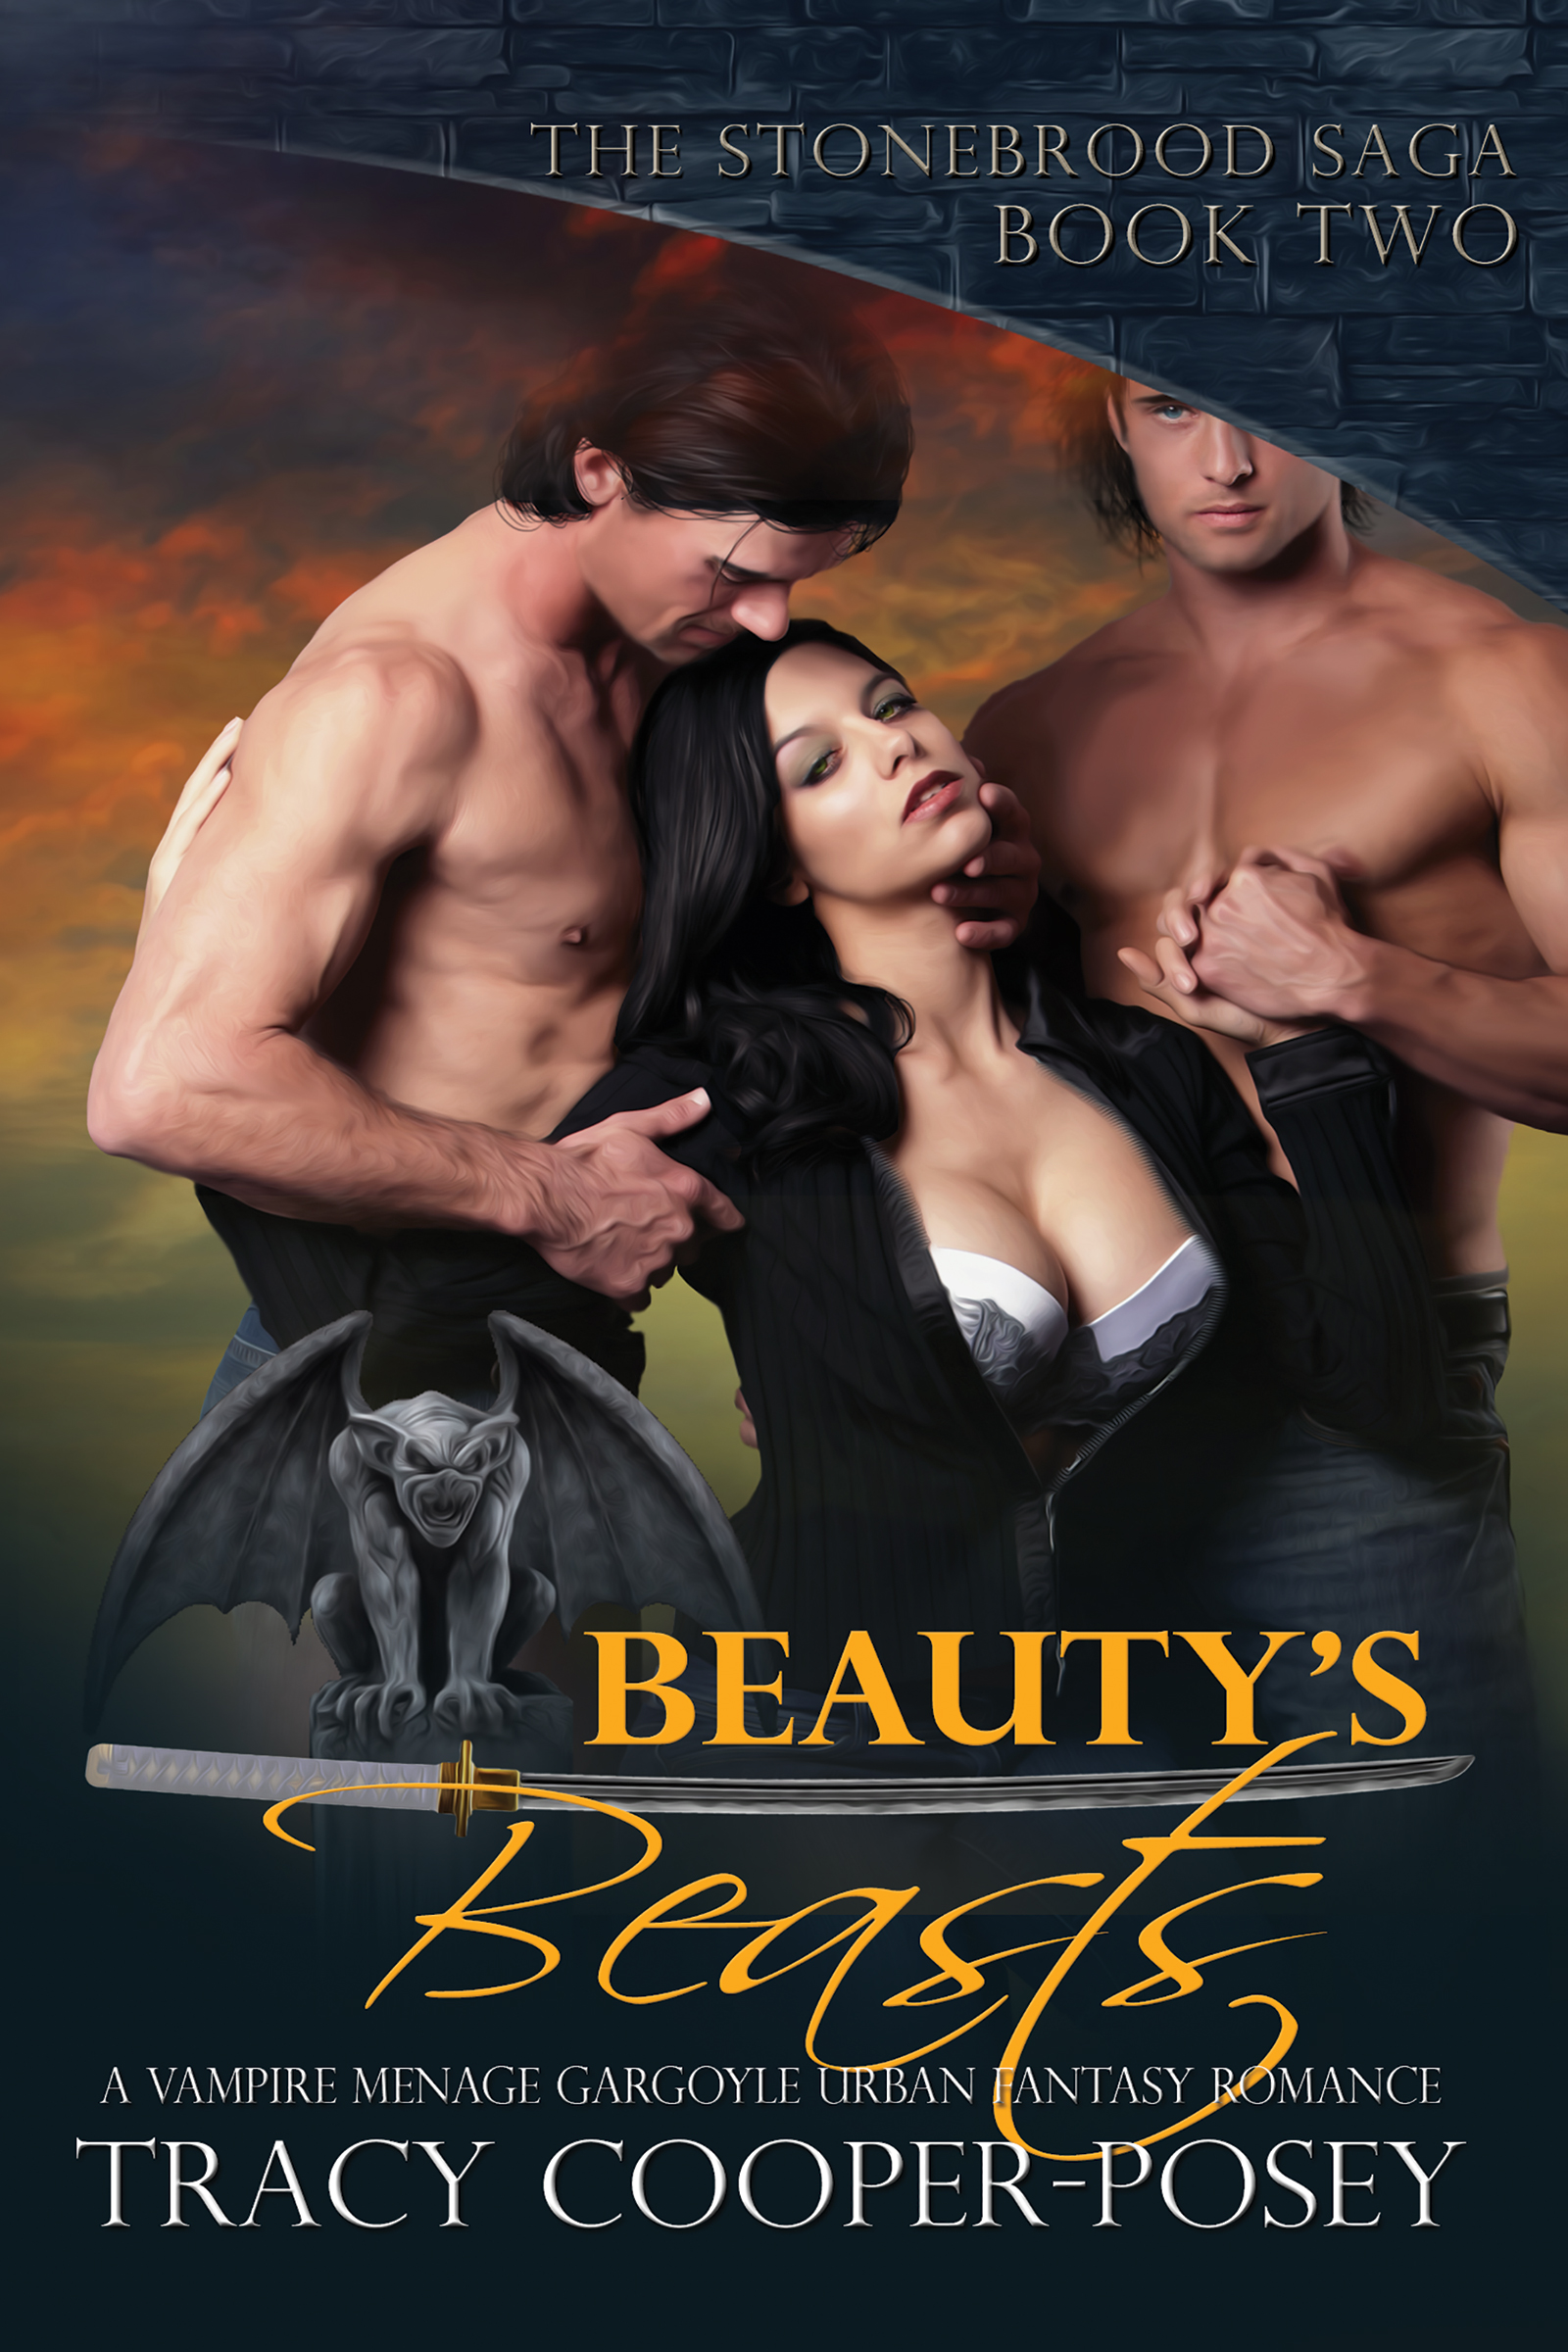 Beauty's Beasts (2016) by Tracy Cooper-Posey